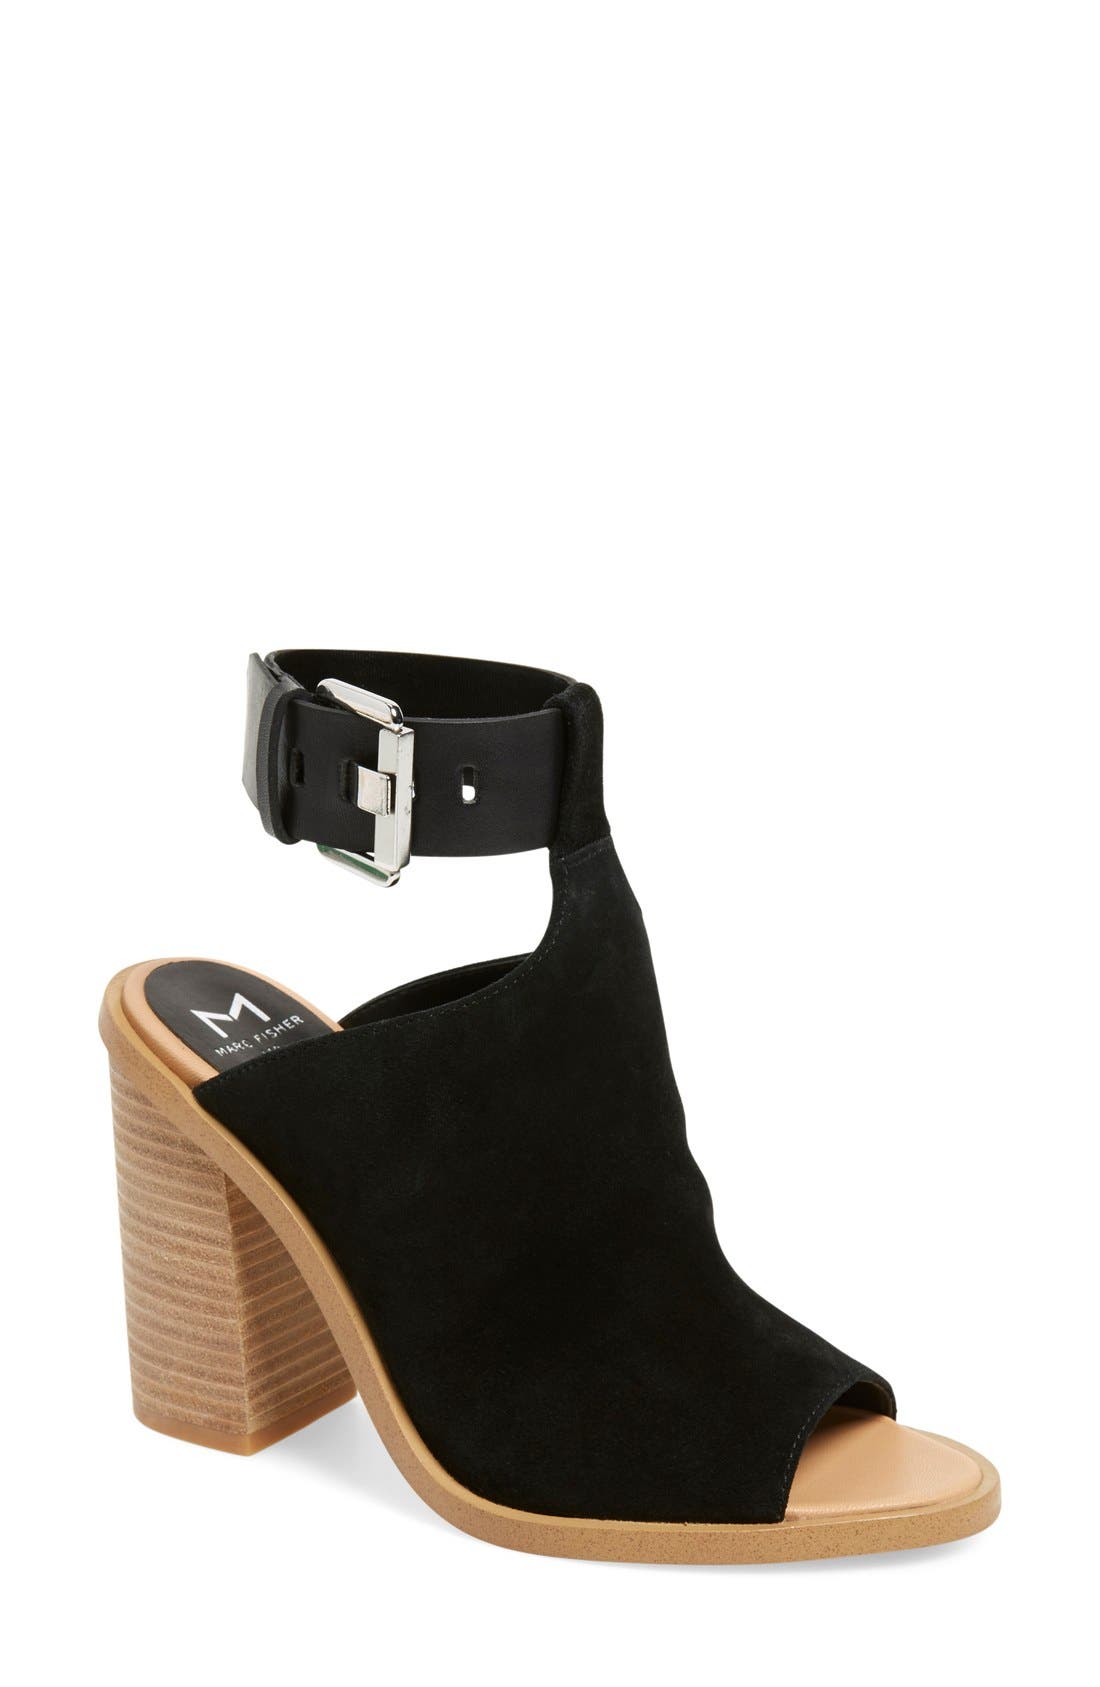 marc fisher ankle strap heels